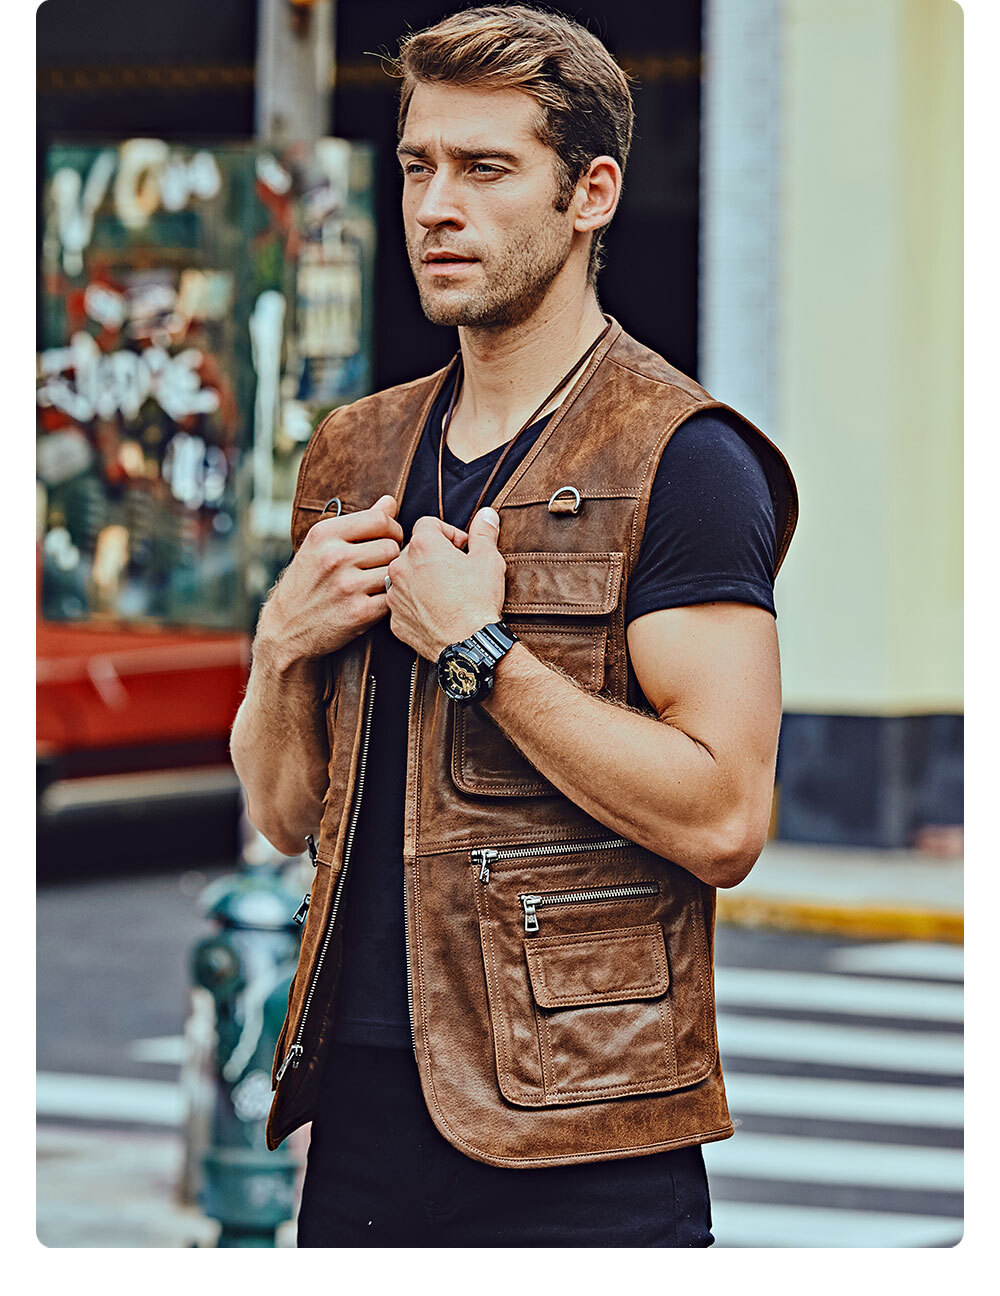 Men's Leather Retro Vest Mult Pockets MXGX280 Buy flavor leather stand collar rib button jacket| buy men's lambskin leather down jacket